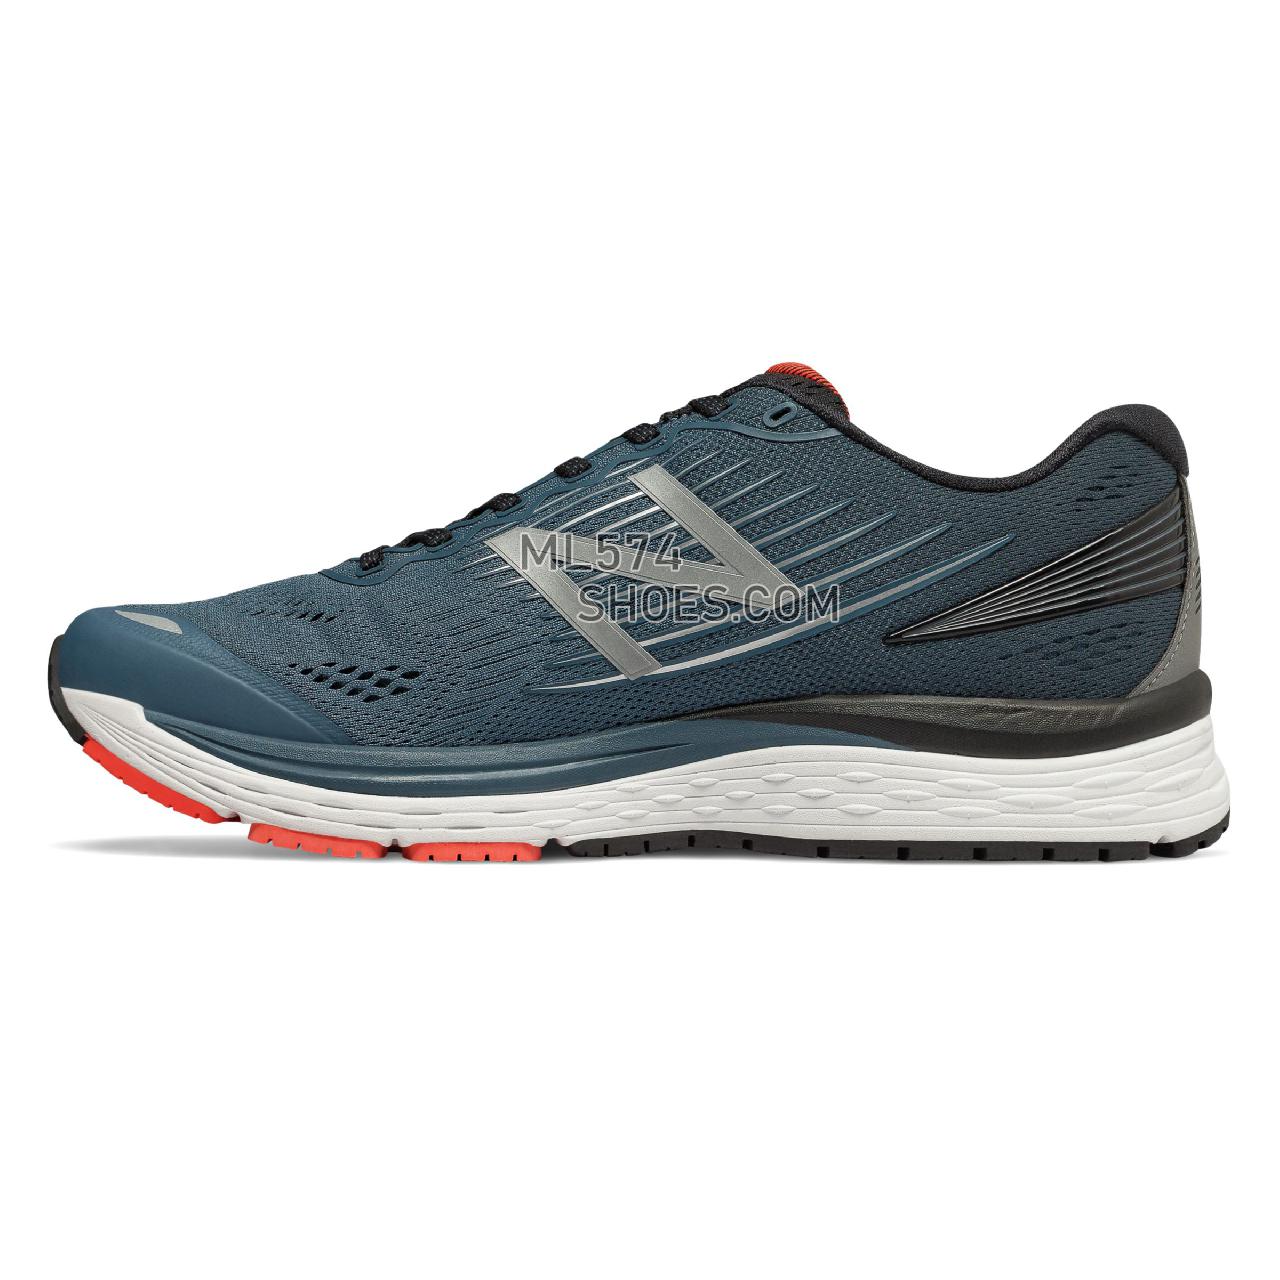 New Balance 880v8 - Men's 880 - Running Petrol with Flame - M880PF8